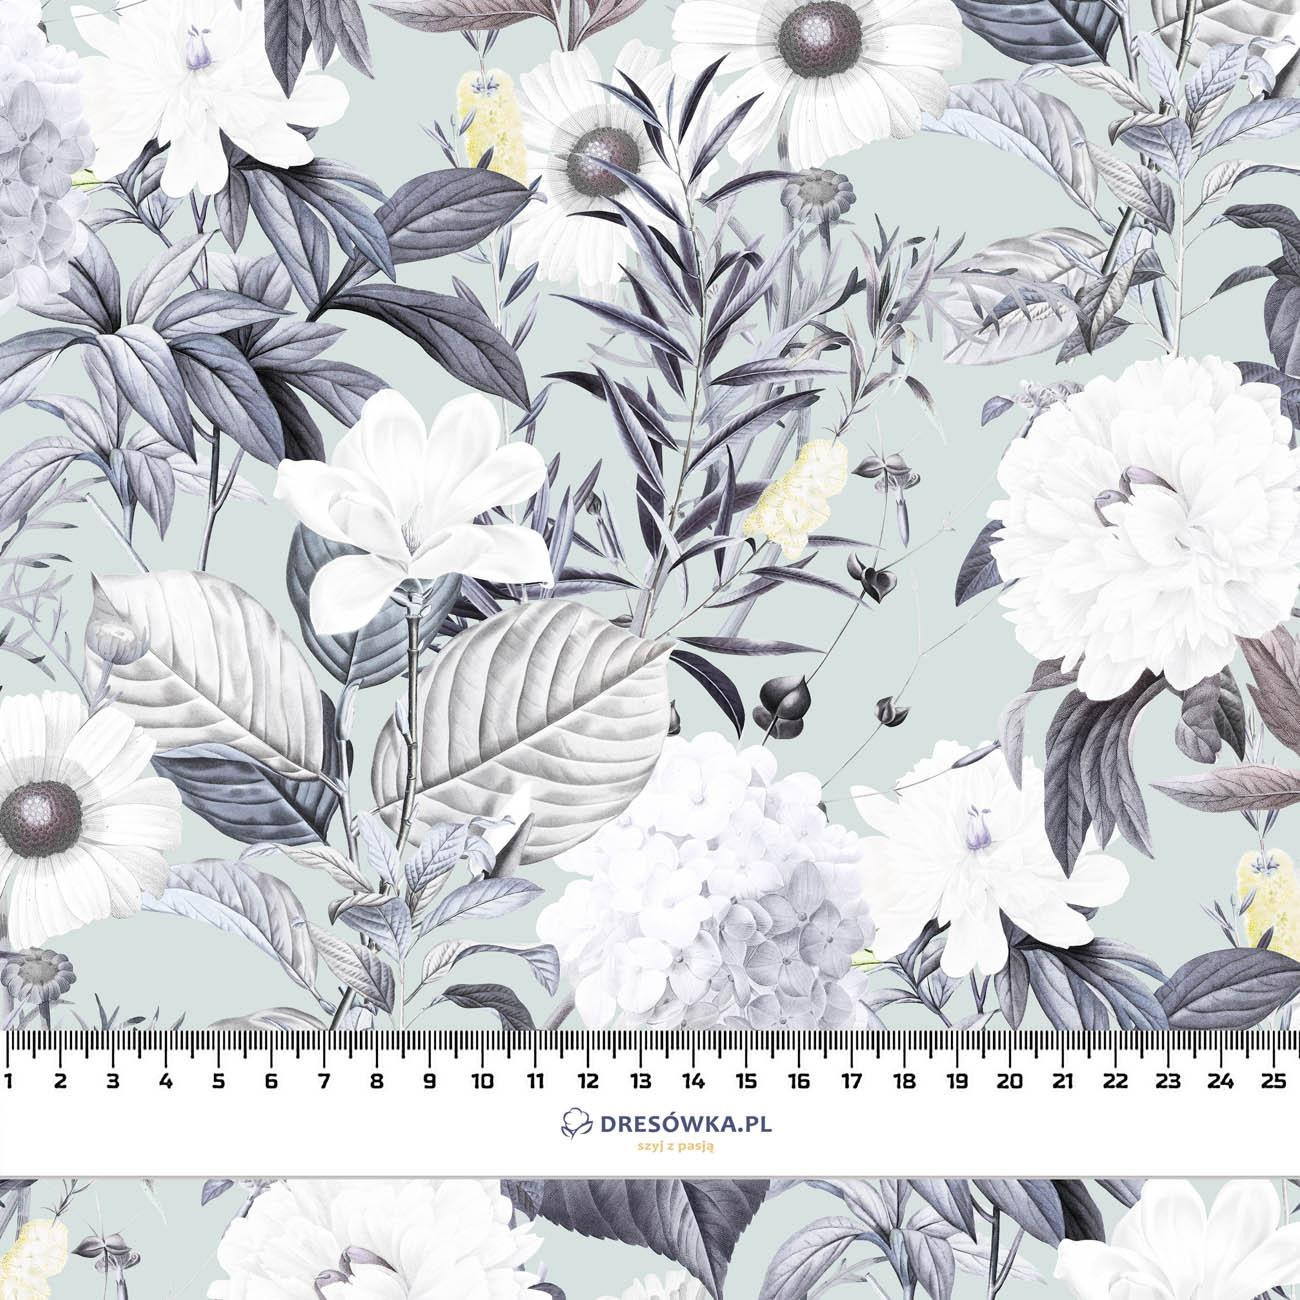 LUXE BLOSSOM pat. 3 - Waterproof woven fabric